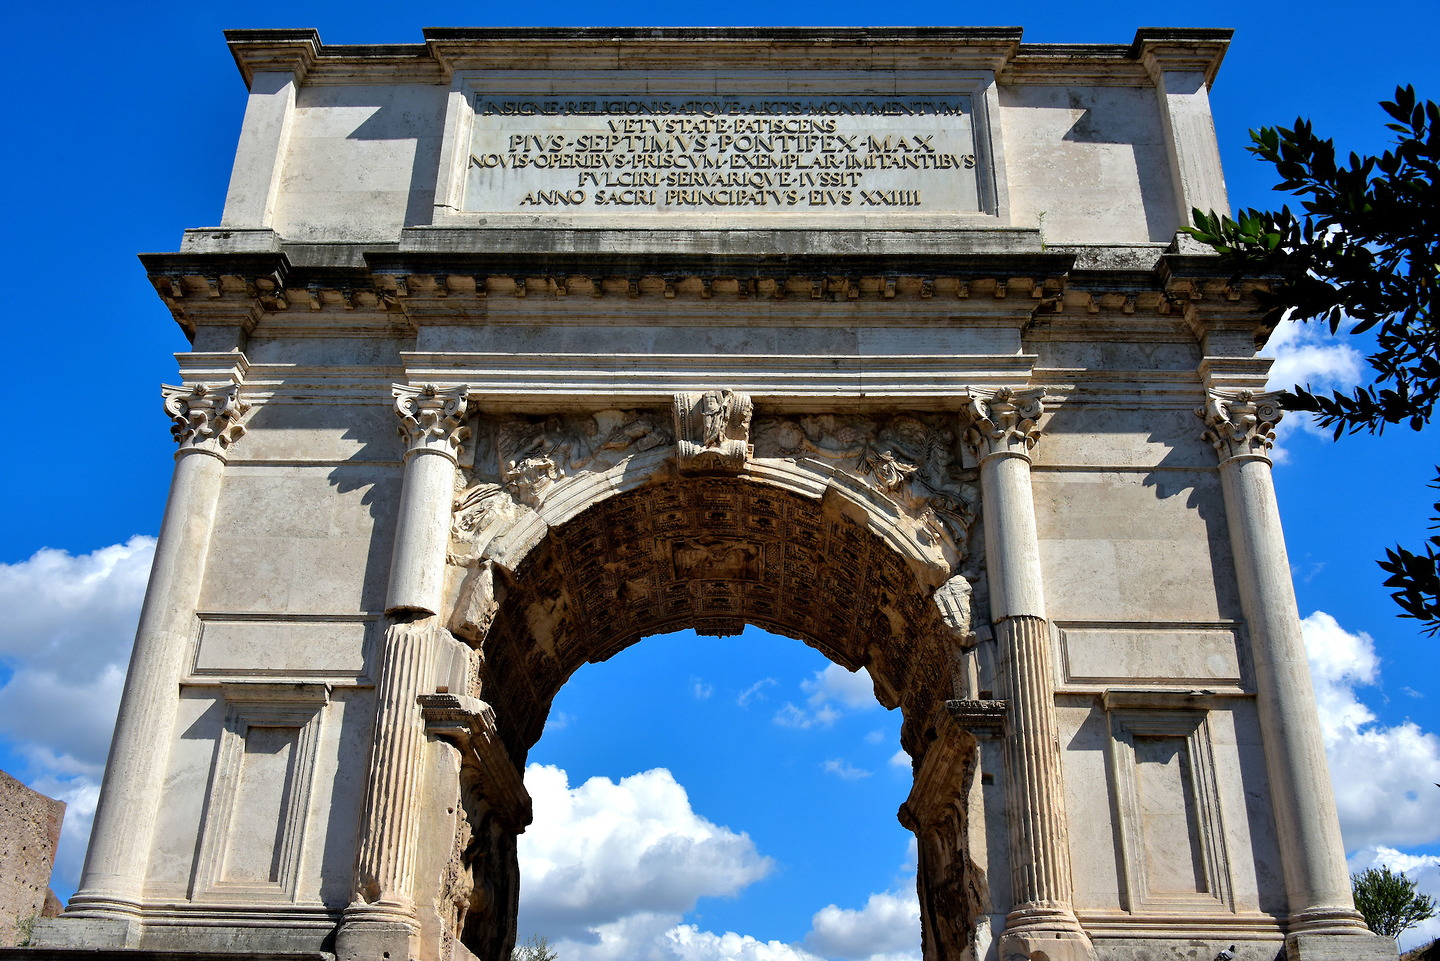 General 1440x961 Arch of Titus landmark Rome Italy Europe arch architecture